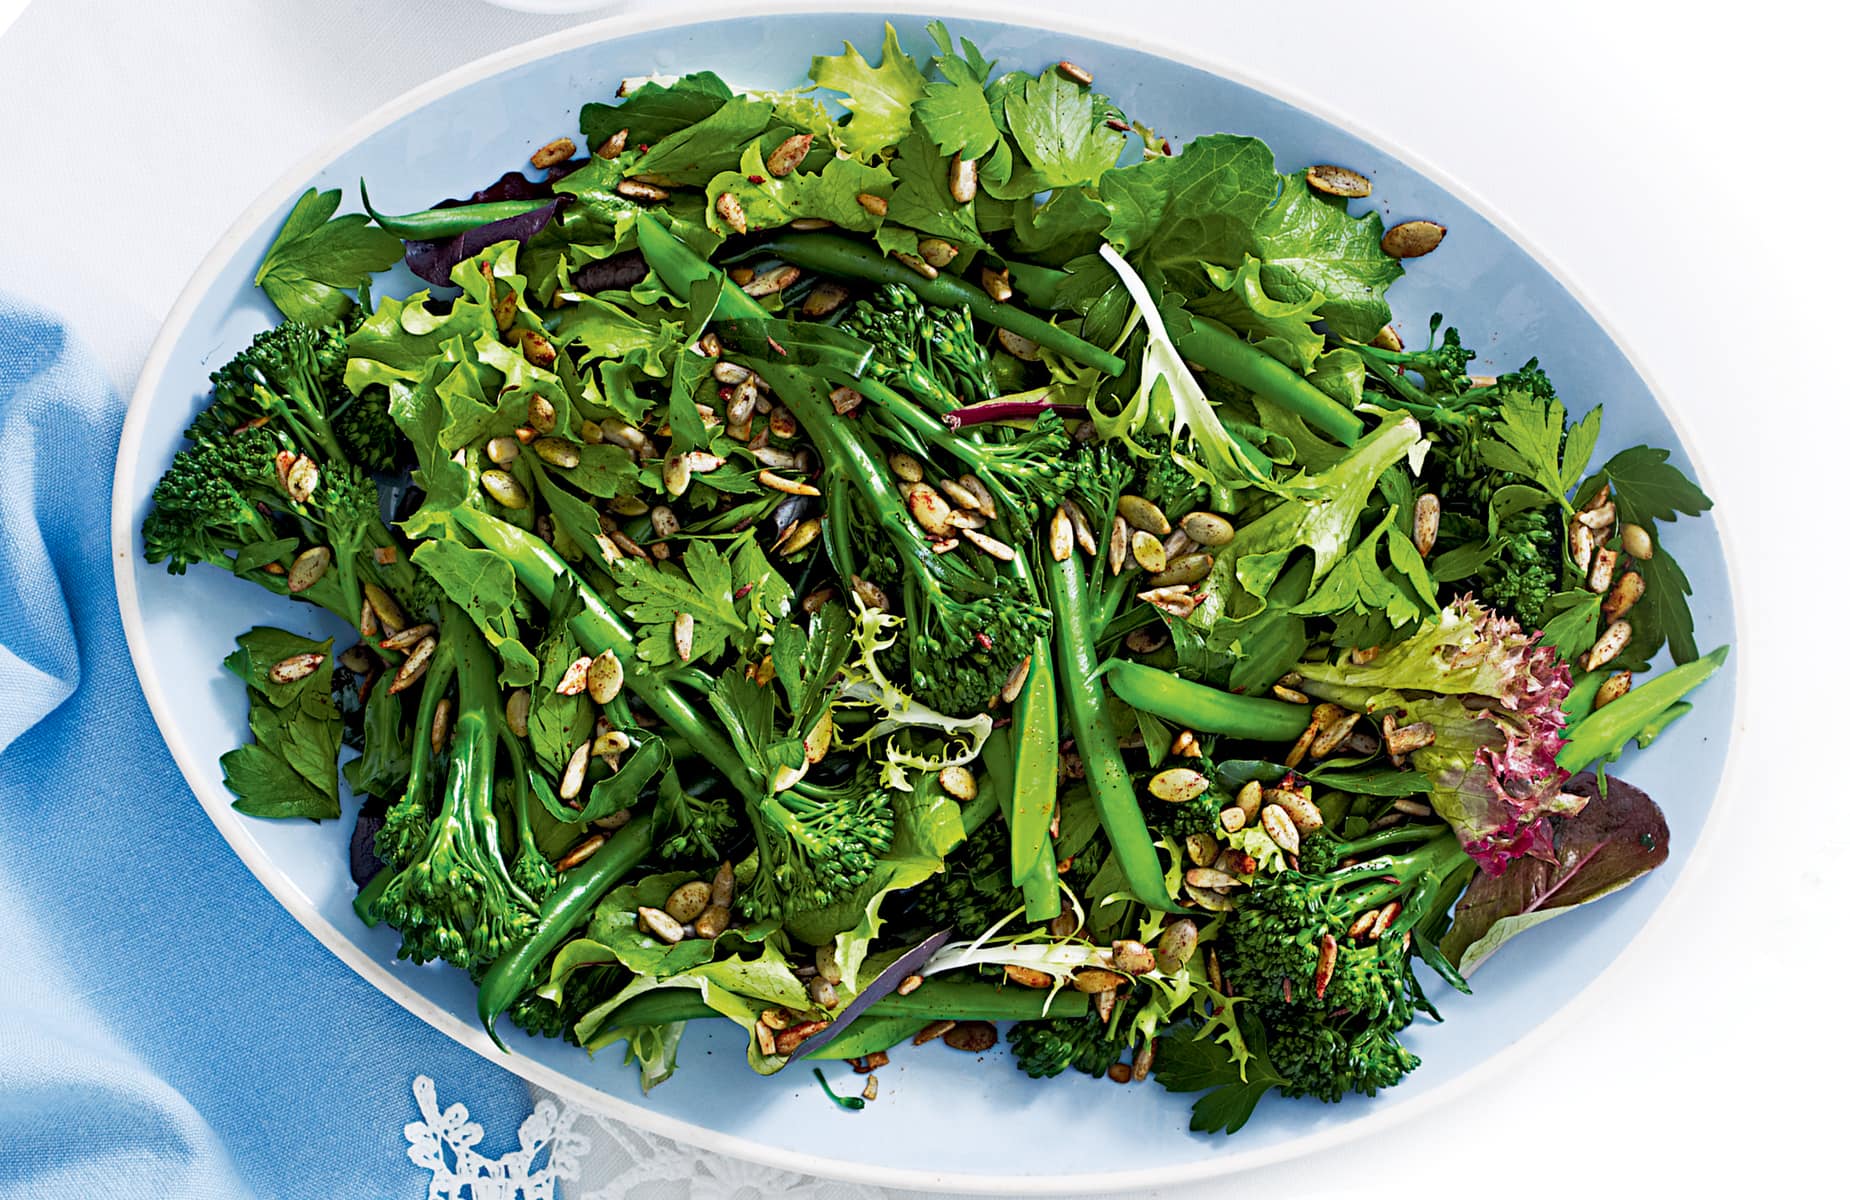 Green vege salad with crunchy seeds - Healthy Food Guide